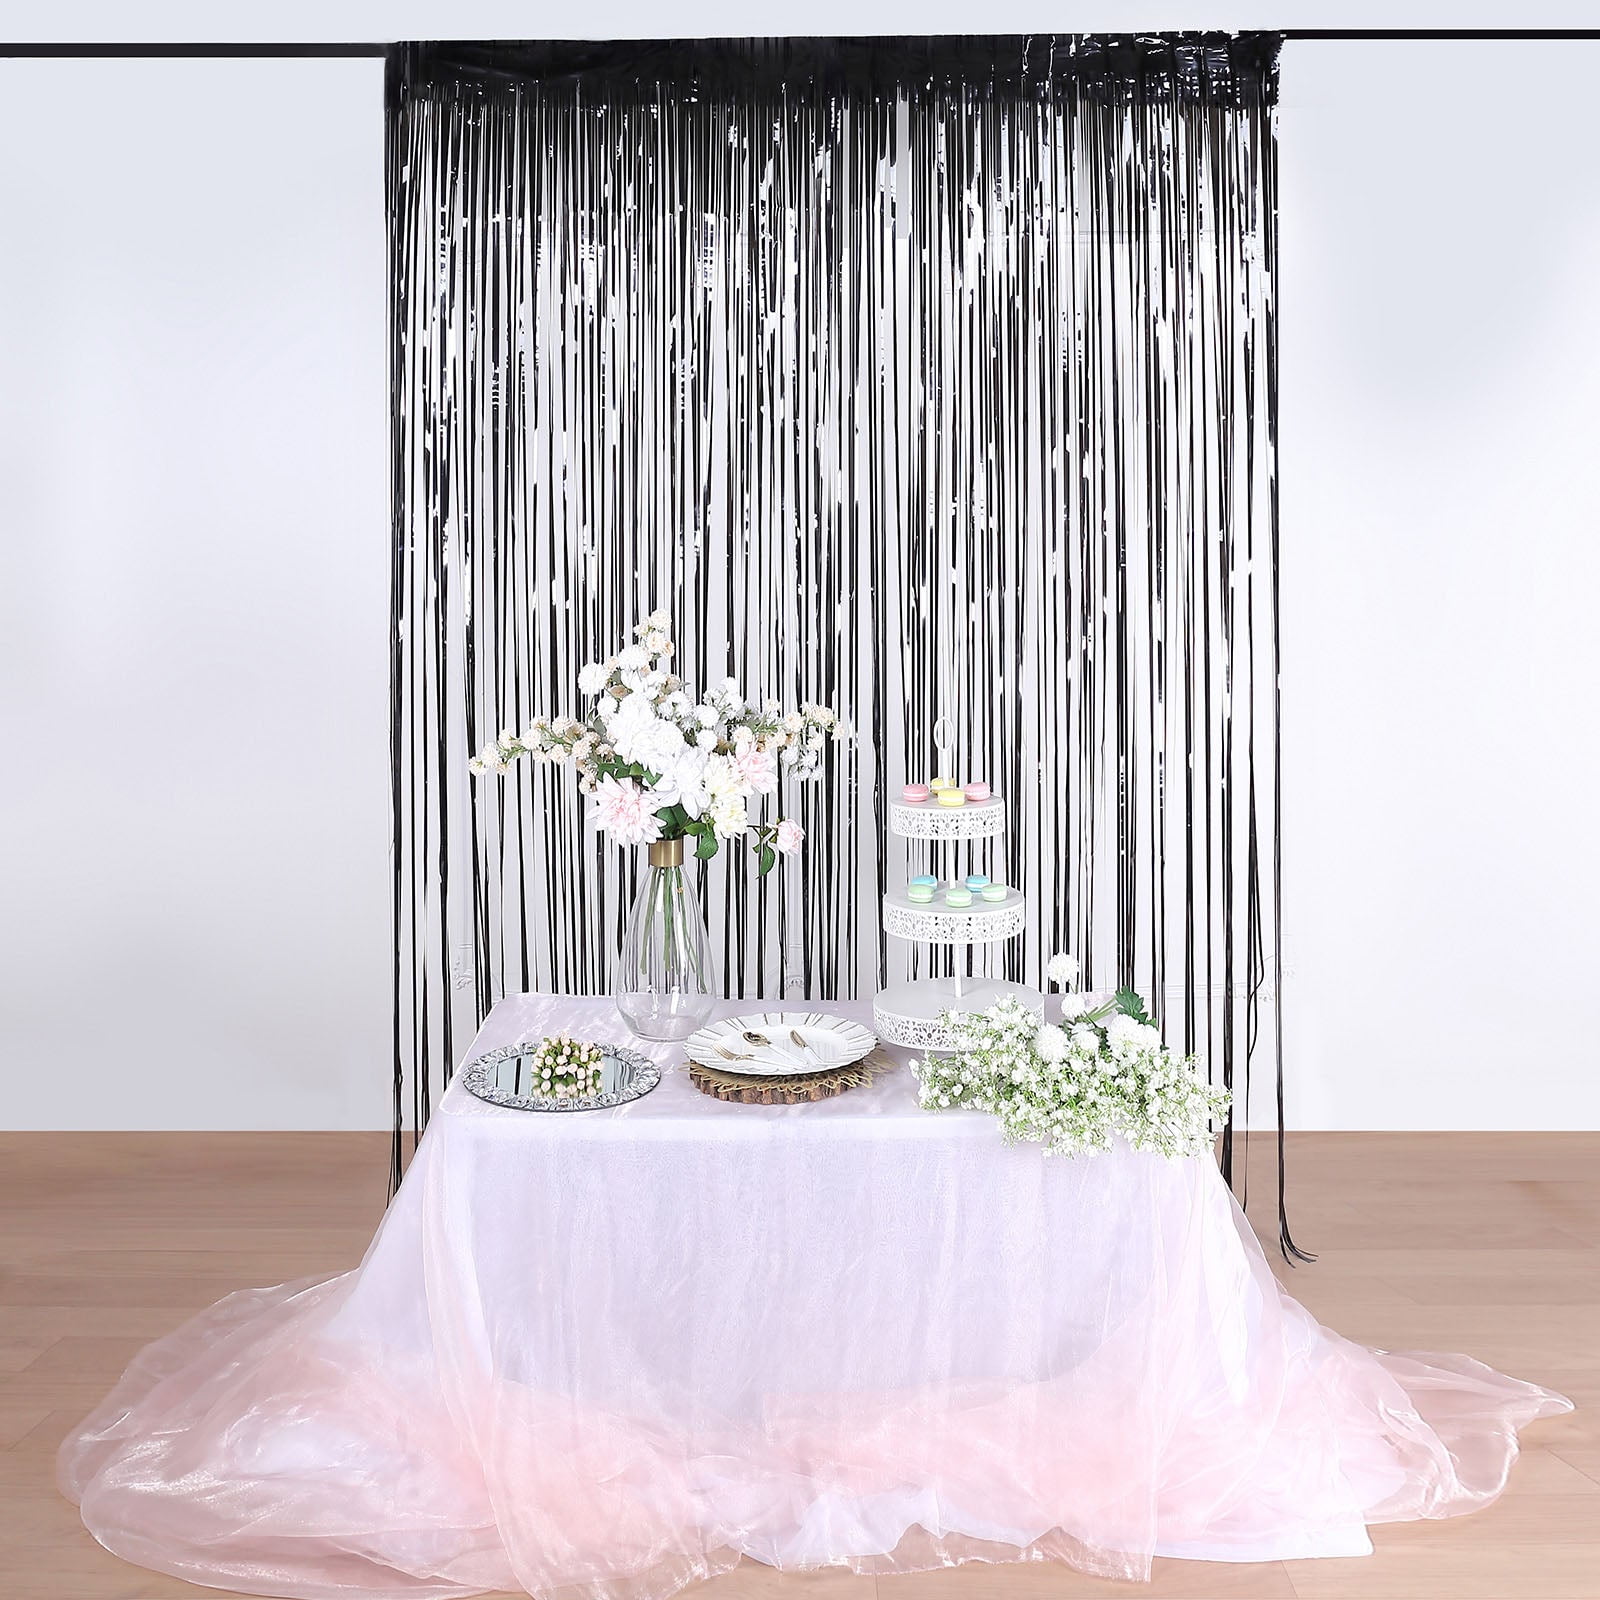 1.9 Inch x 262 ft Metallic Streamer Silver Streamers Hanging Wedding  Streamer Plastic Streamers Black Foil Fringe Curtain for Curtains Party  Birthday